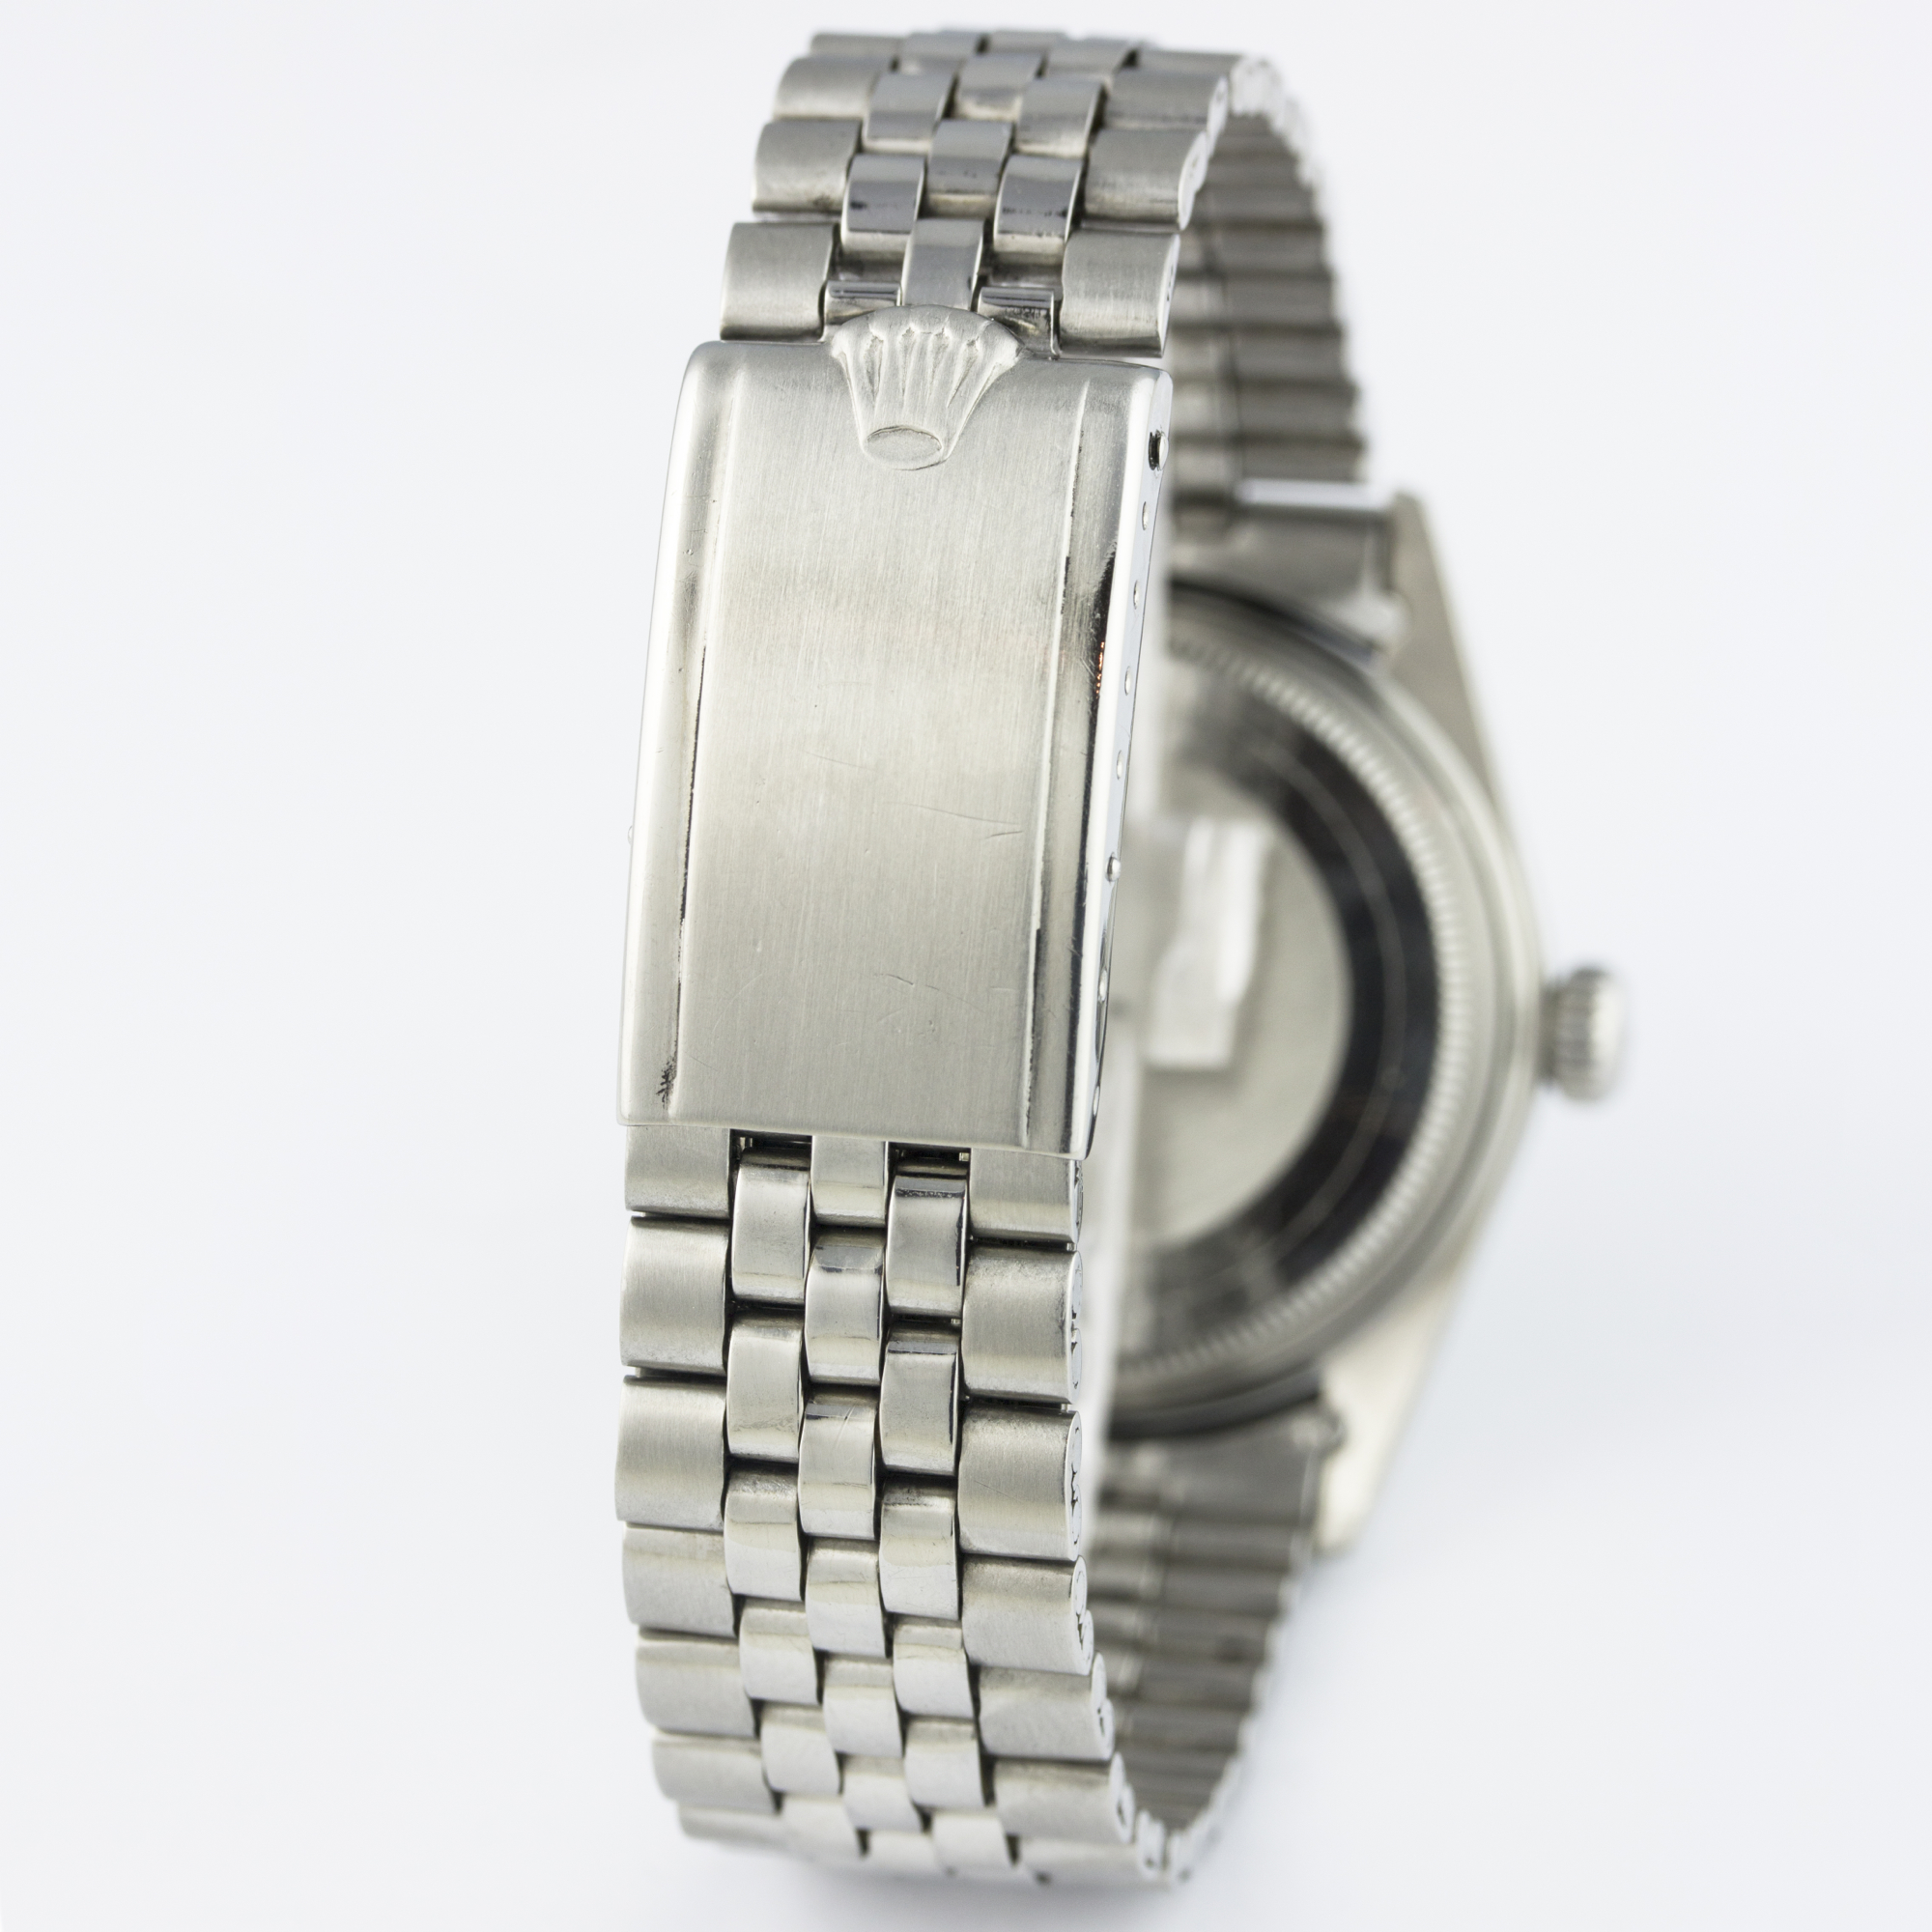 A GENTLEMAN'S STAINLESS STEEL & WHITE GOLD ROLEX OYSTER PERPETUAL DATEJUST BRACELET WATCH CIRCA - Image 6 of 10